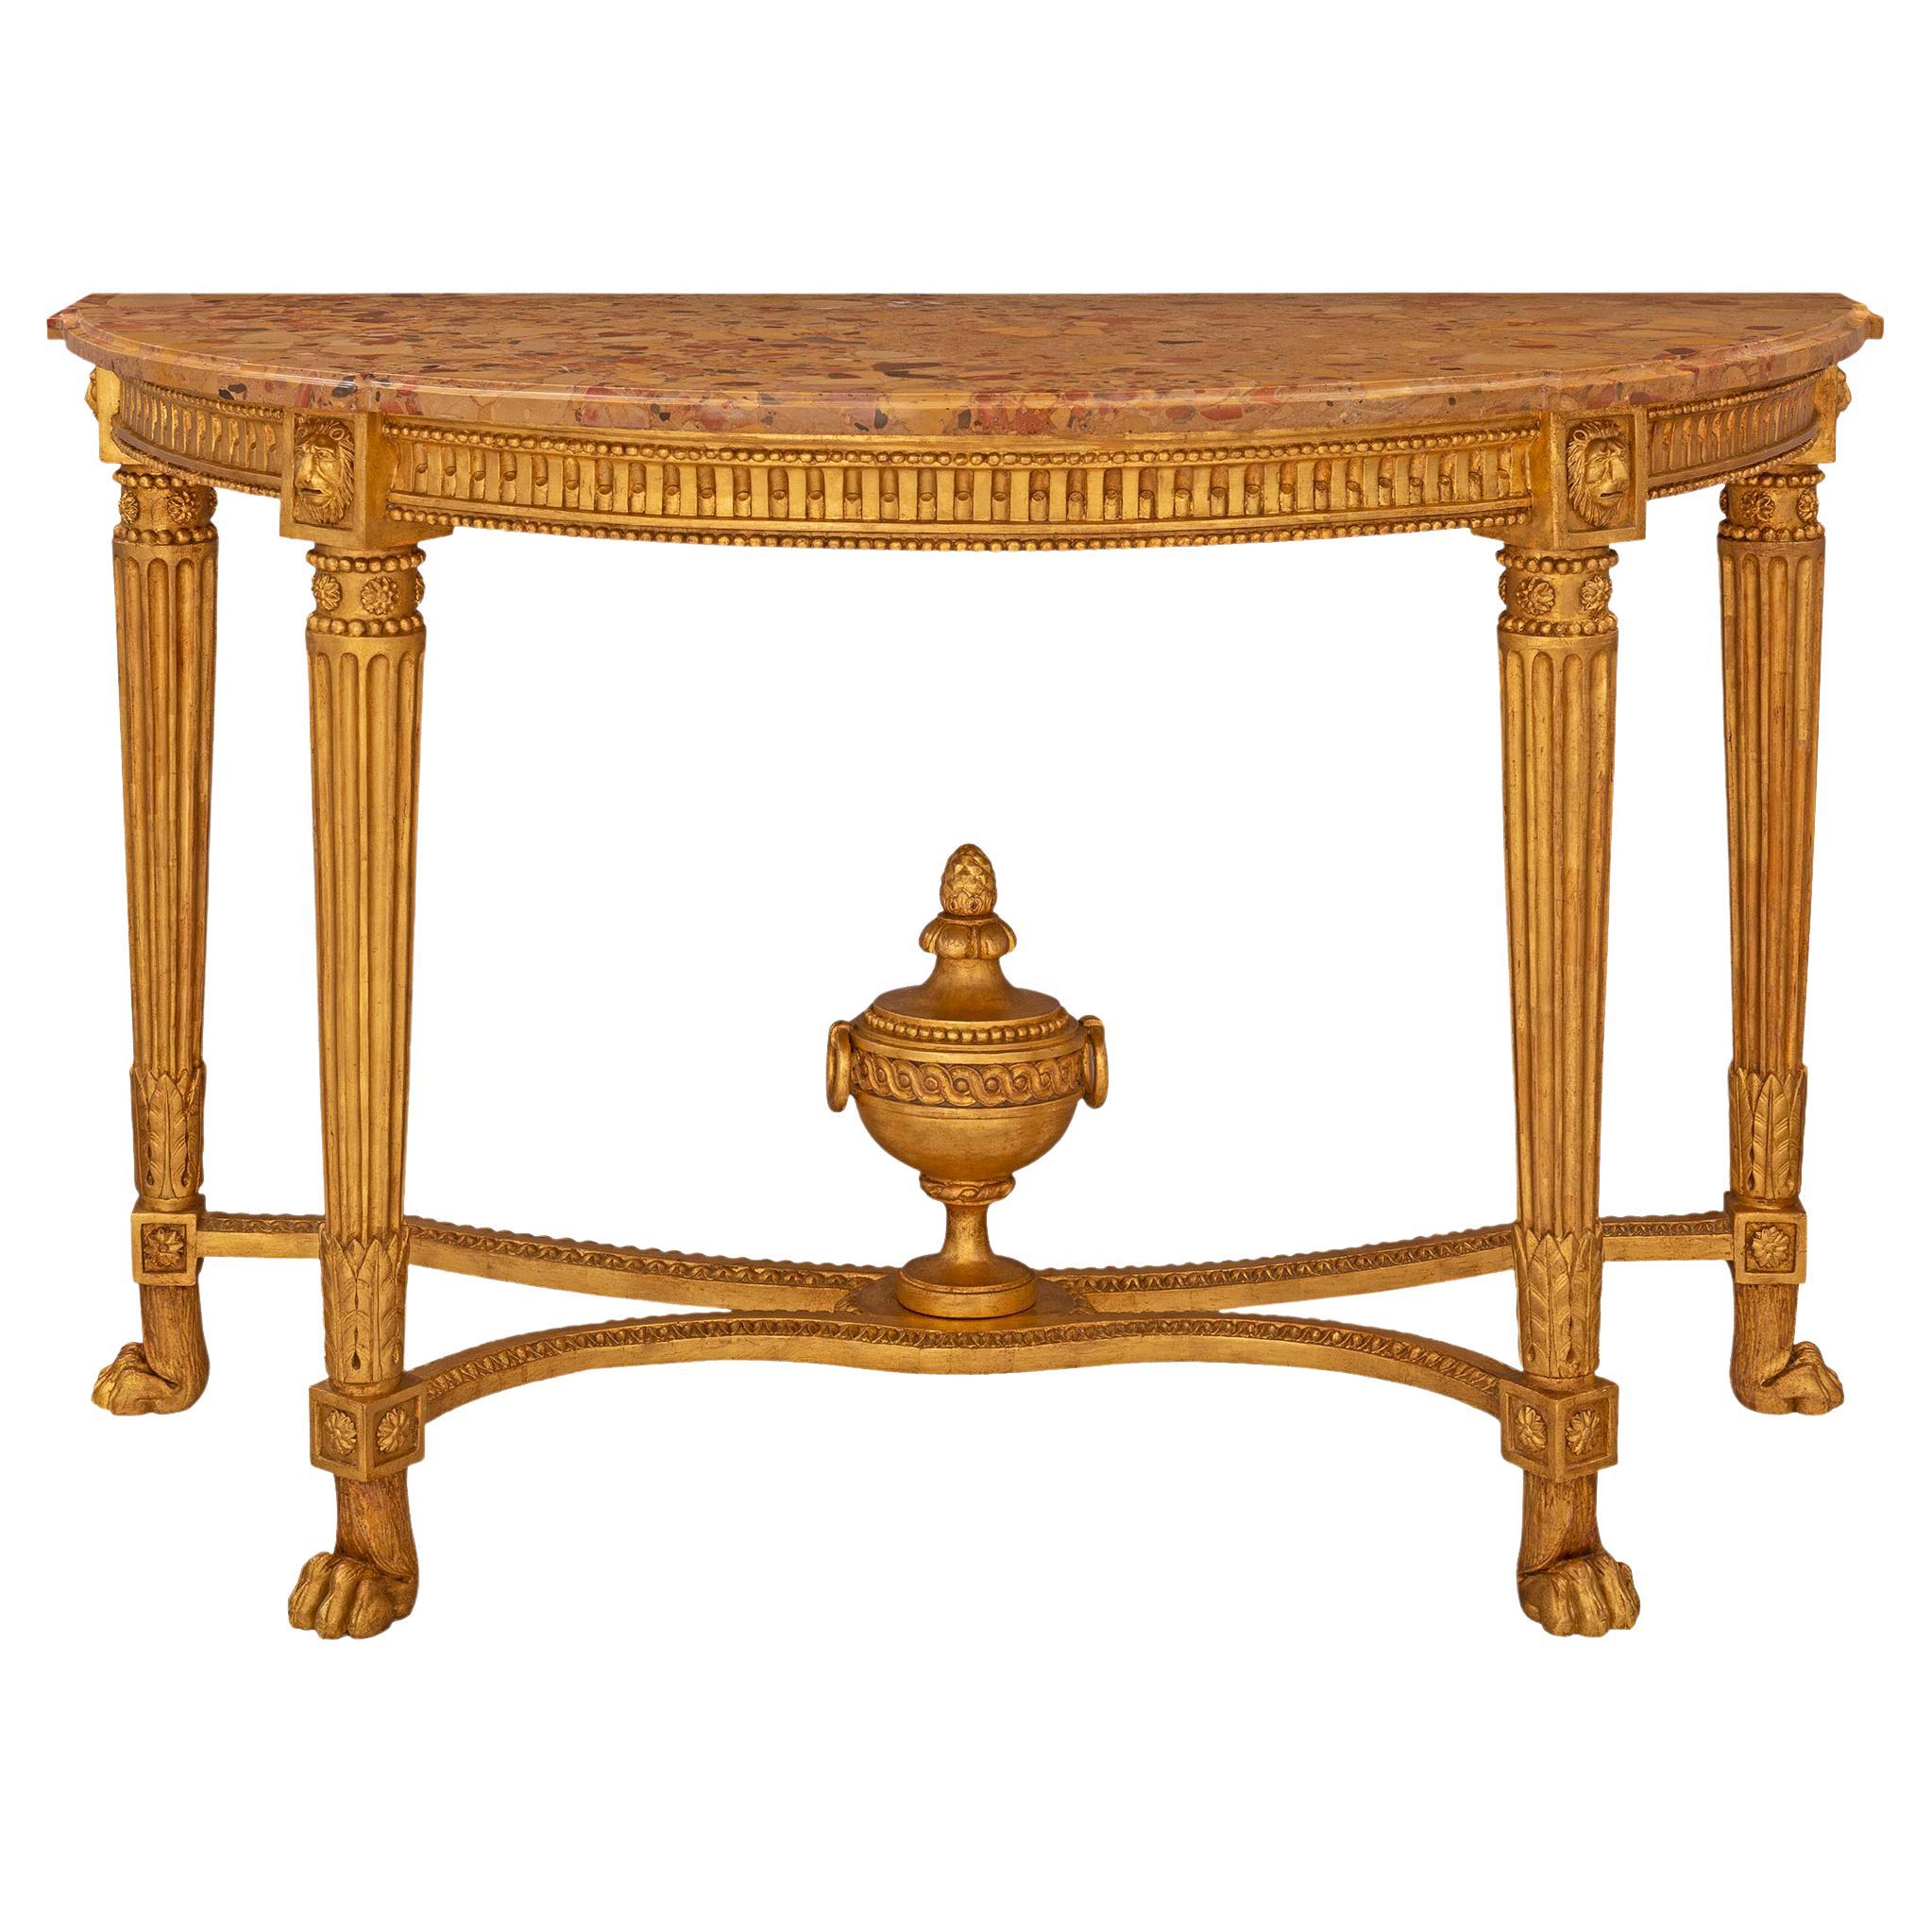 French 18th Century Louis XVI Period Giltwood and Brèche D’alep Marble Console For Sale